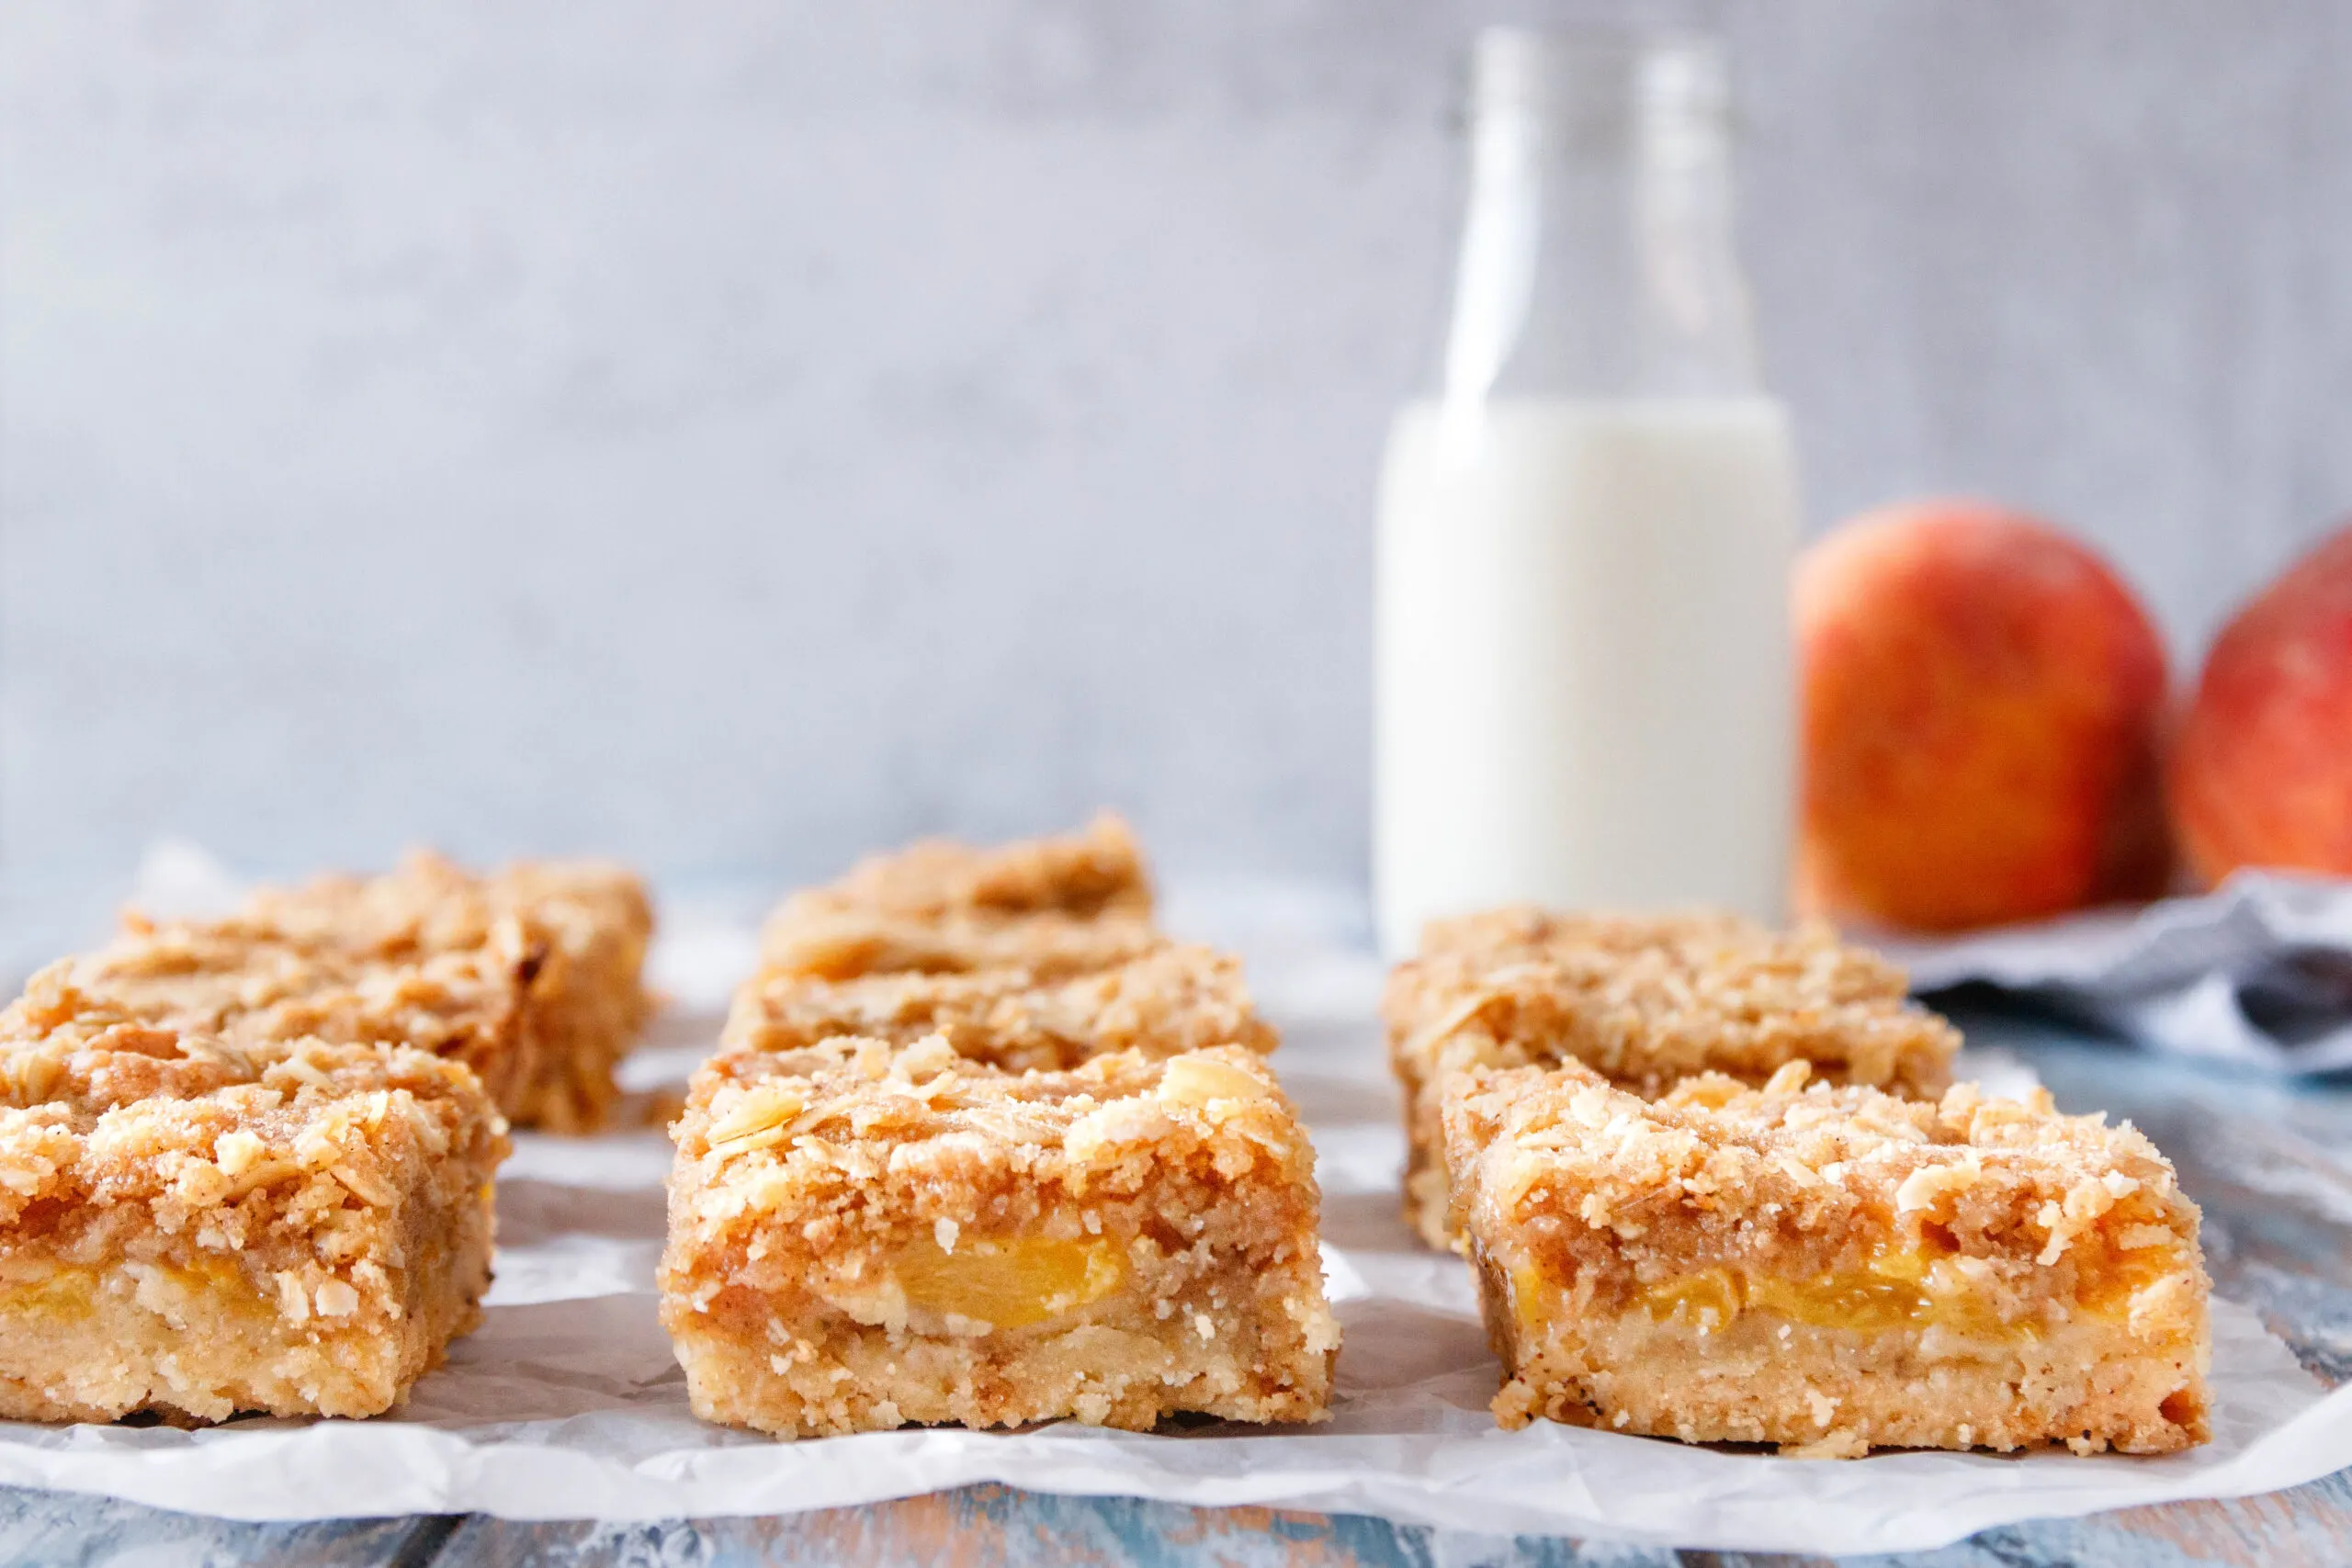 close up of the bars arranged in a single layer and sliced so you can see the base, peach, and crumb layers